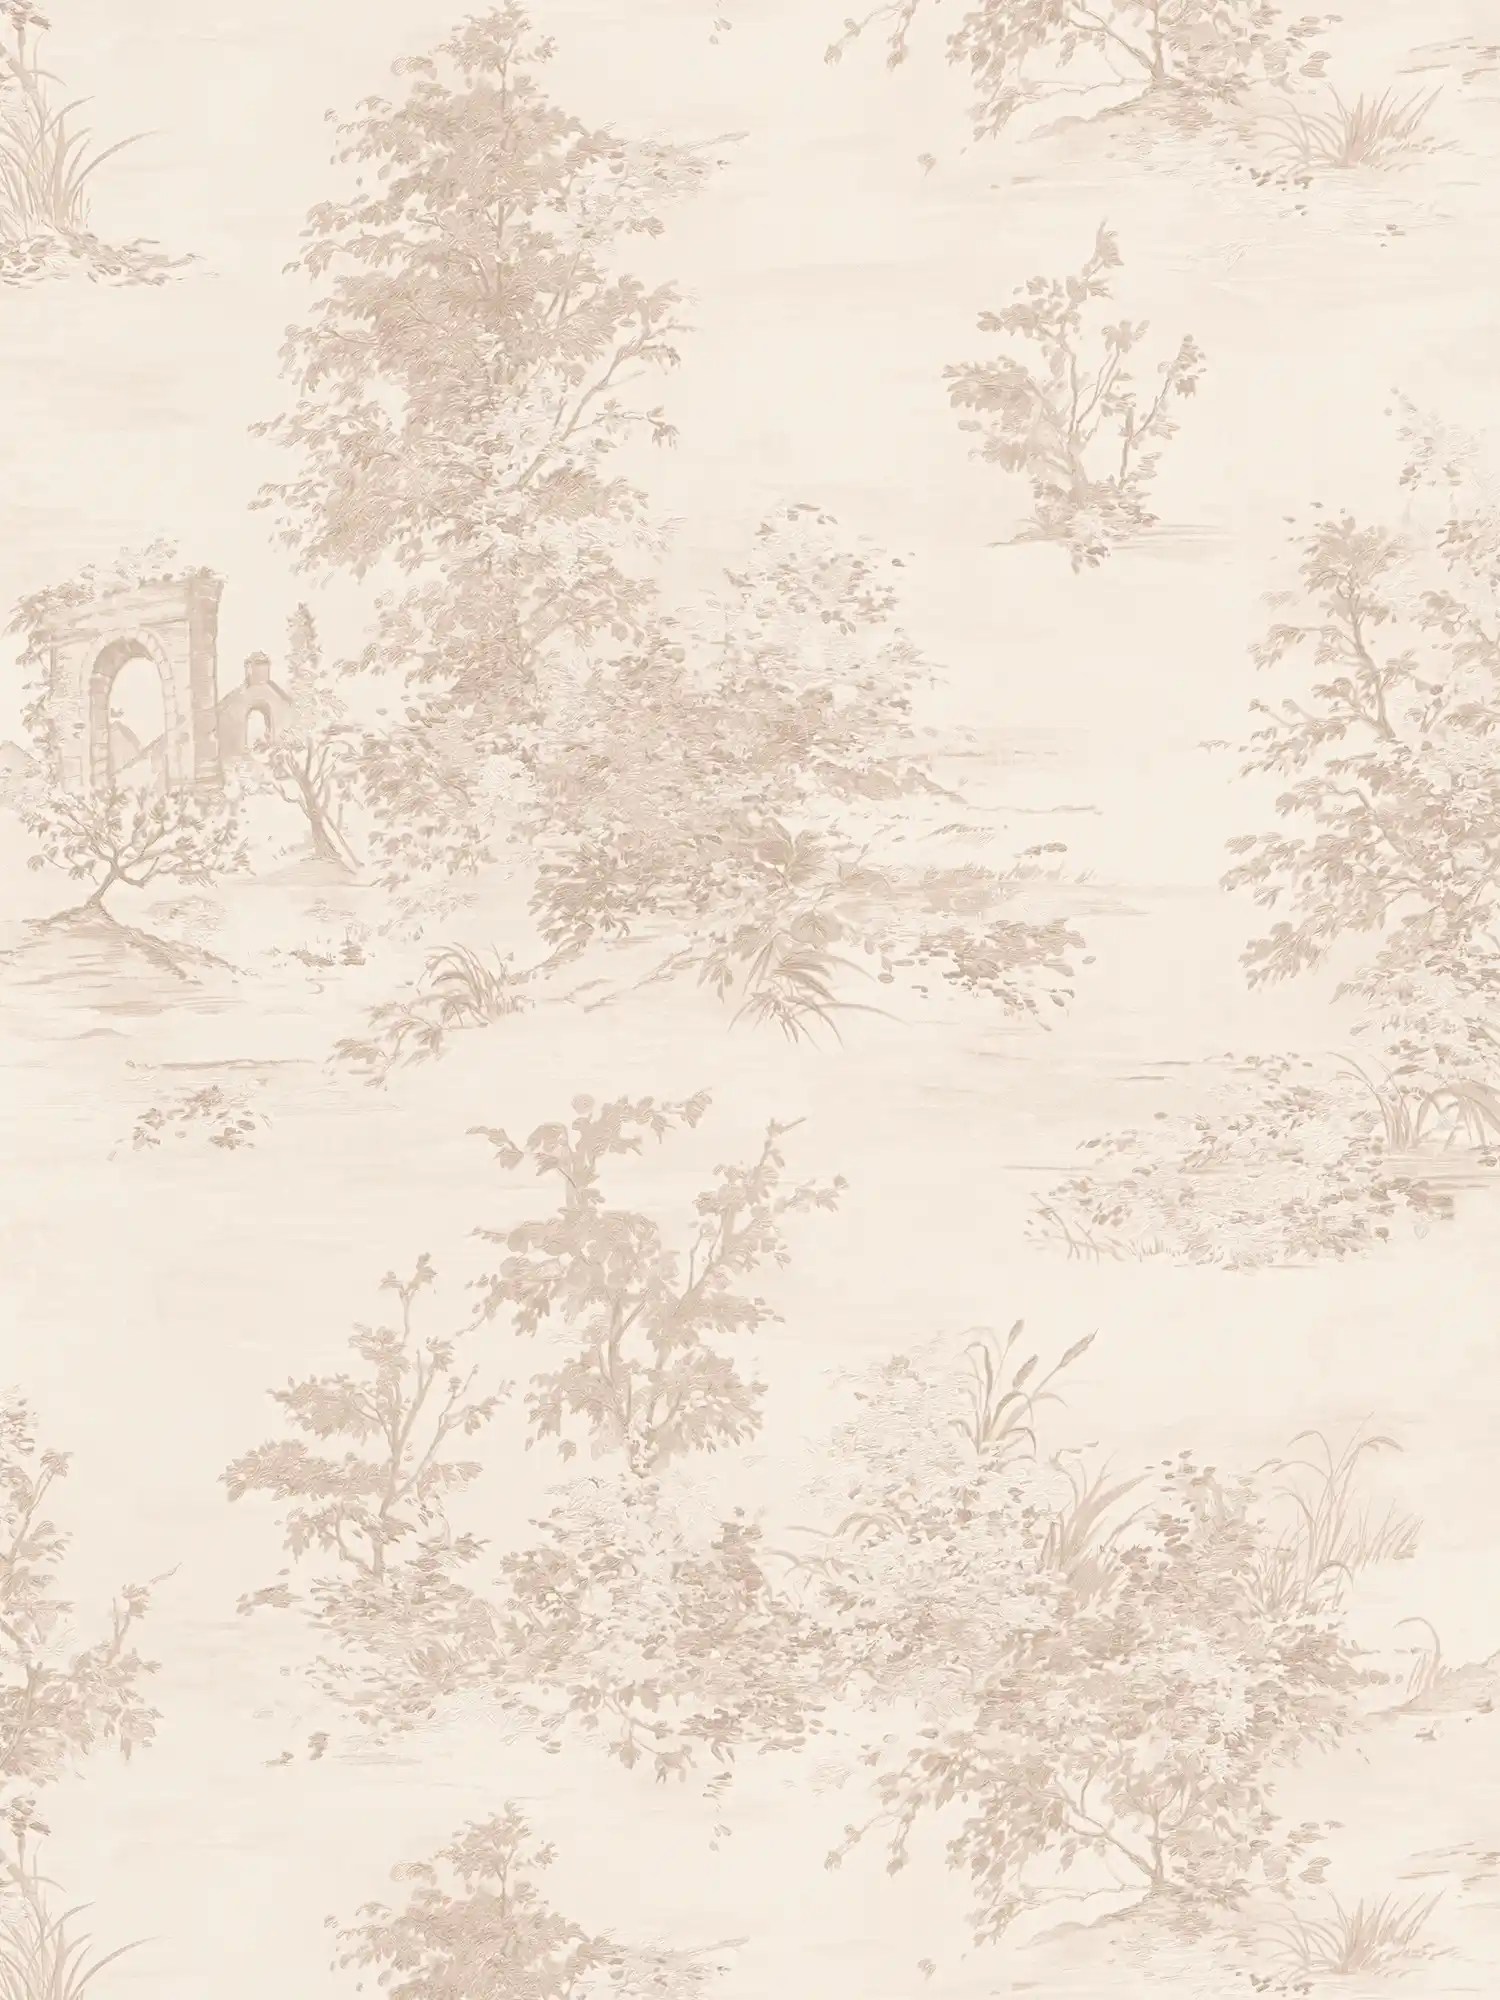 Country house wallpaper in historical style with landscape motif - beige, cream, pink
